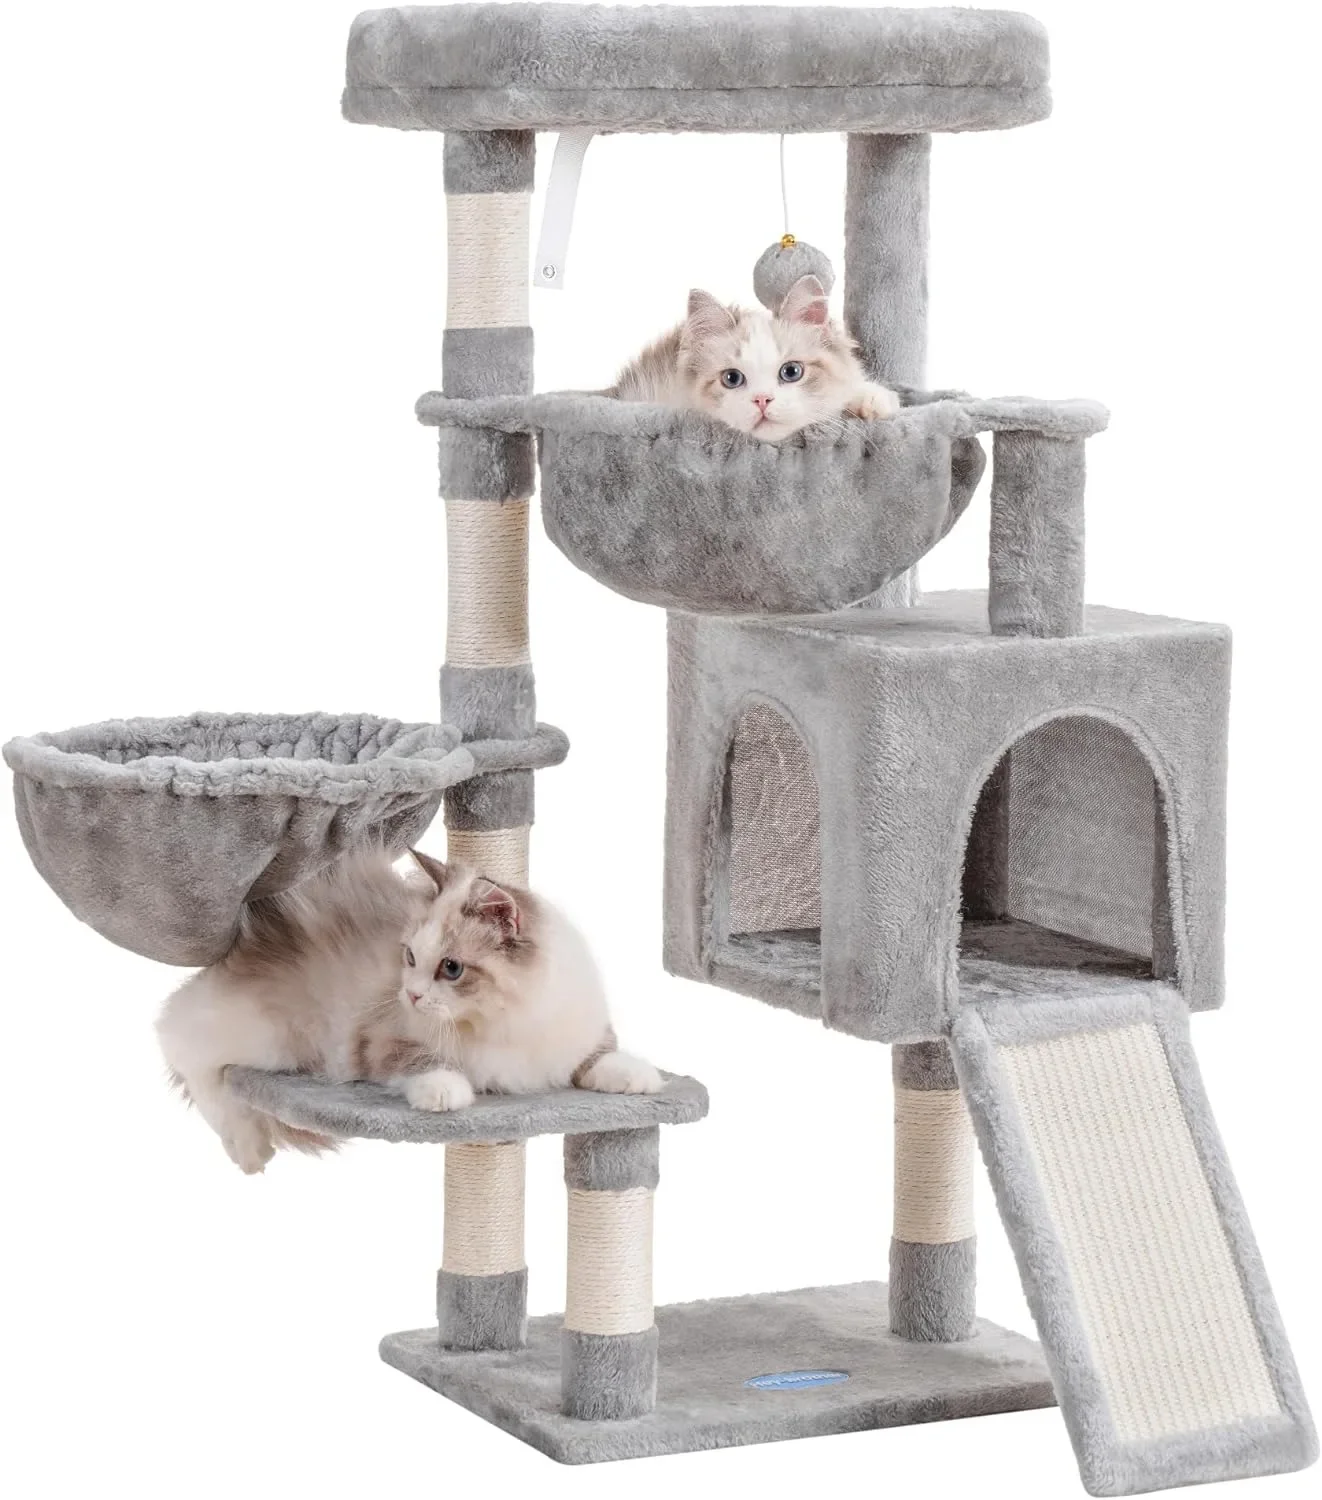 

35.4 inch Cat Tower for Indoor Cats, Cat House with Large Padded Bed, Cozy Condo, Hammocks，Scratching Posts, Big Scratcher